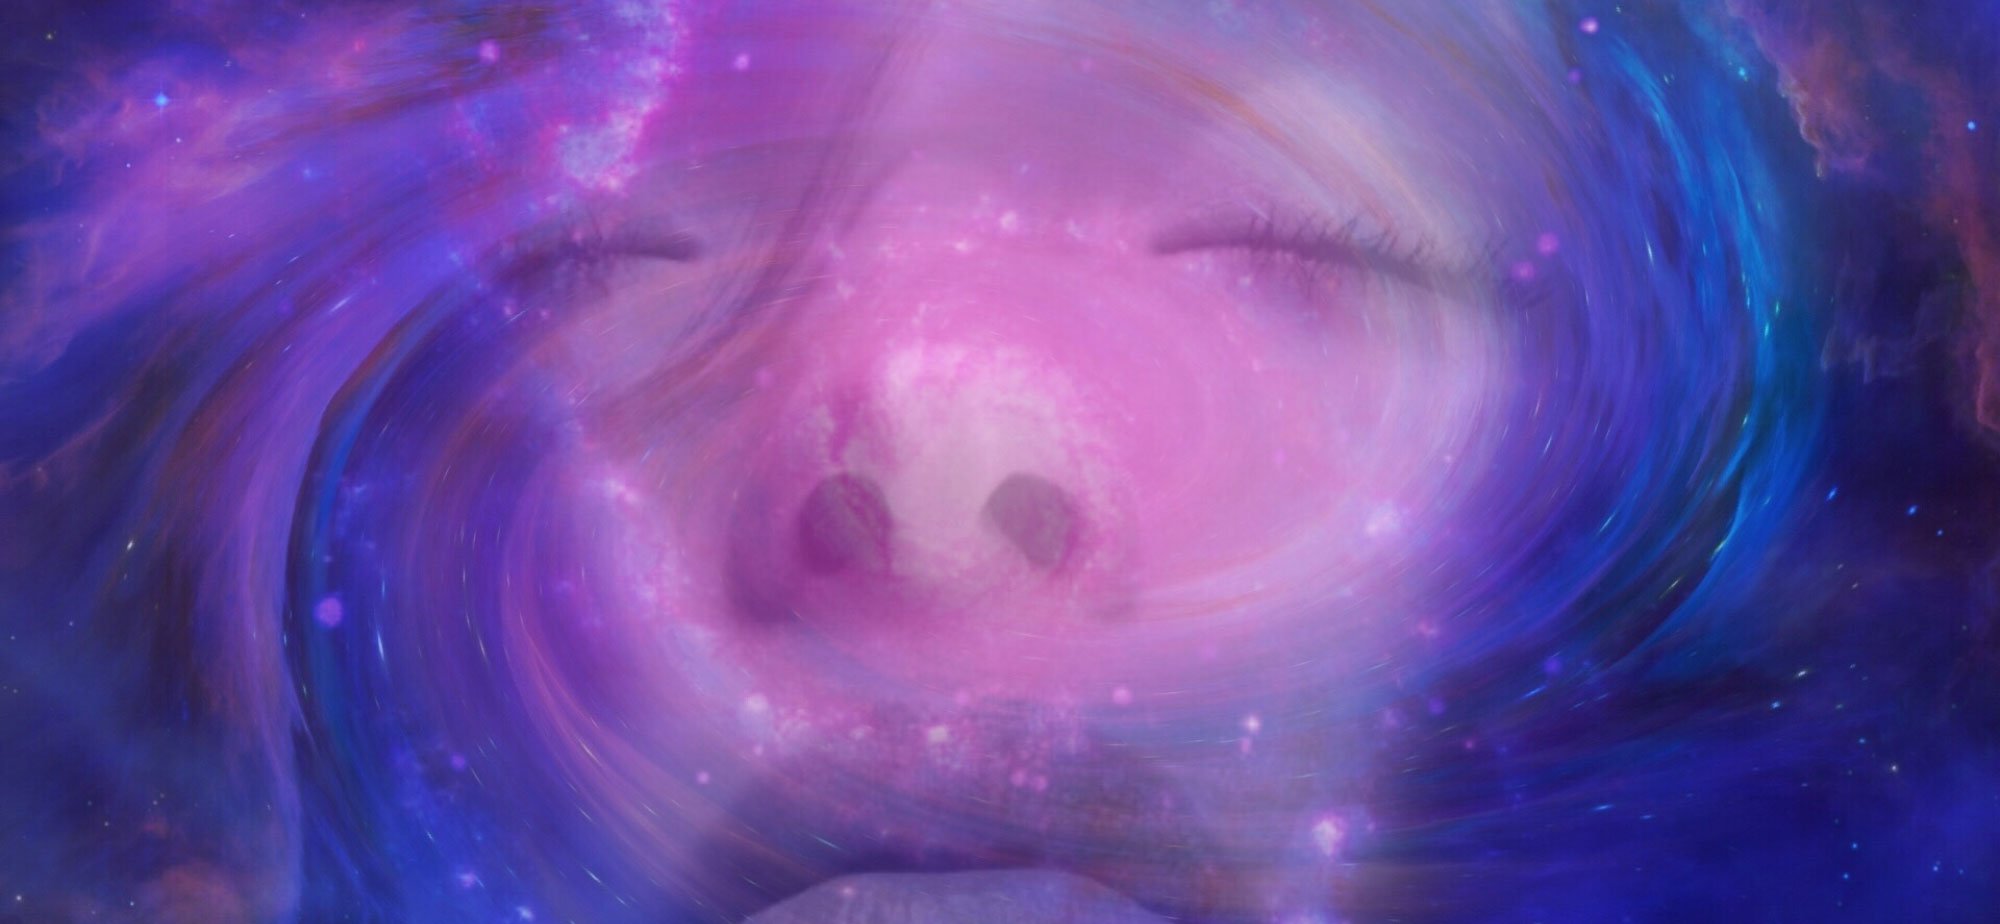 Closeup of a face of a woman with her eyes closed, encased in a swirl of purple sparkly energy